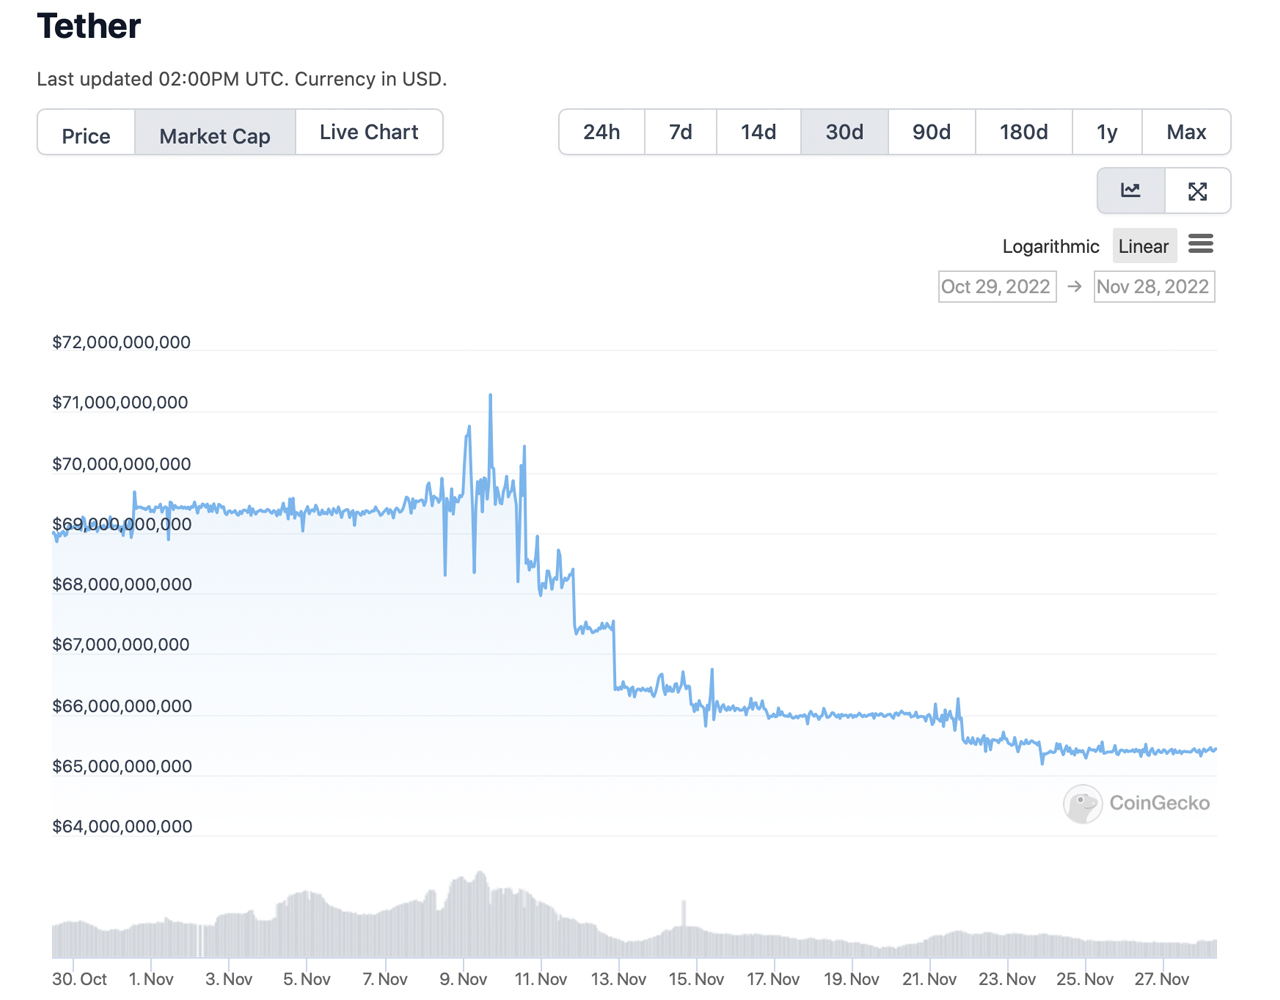 Stablecoin Economy Continues to Cut Losses by Almost 5% in 2 Months